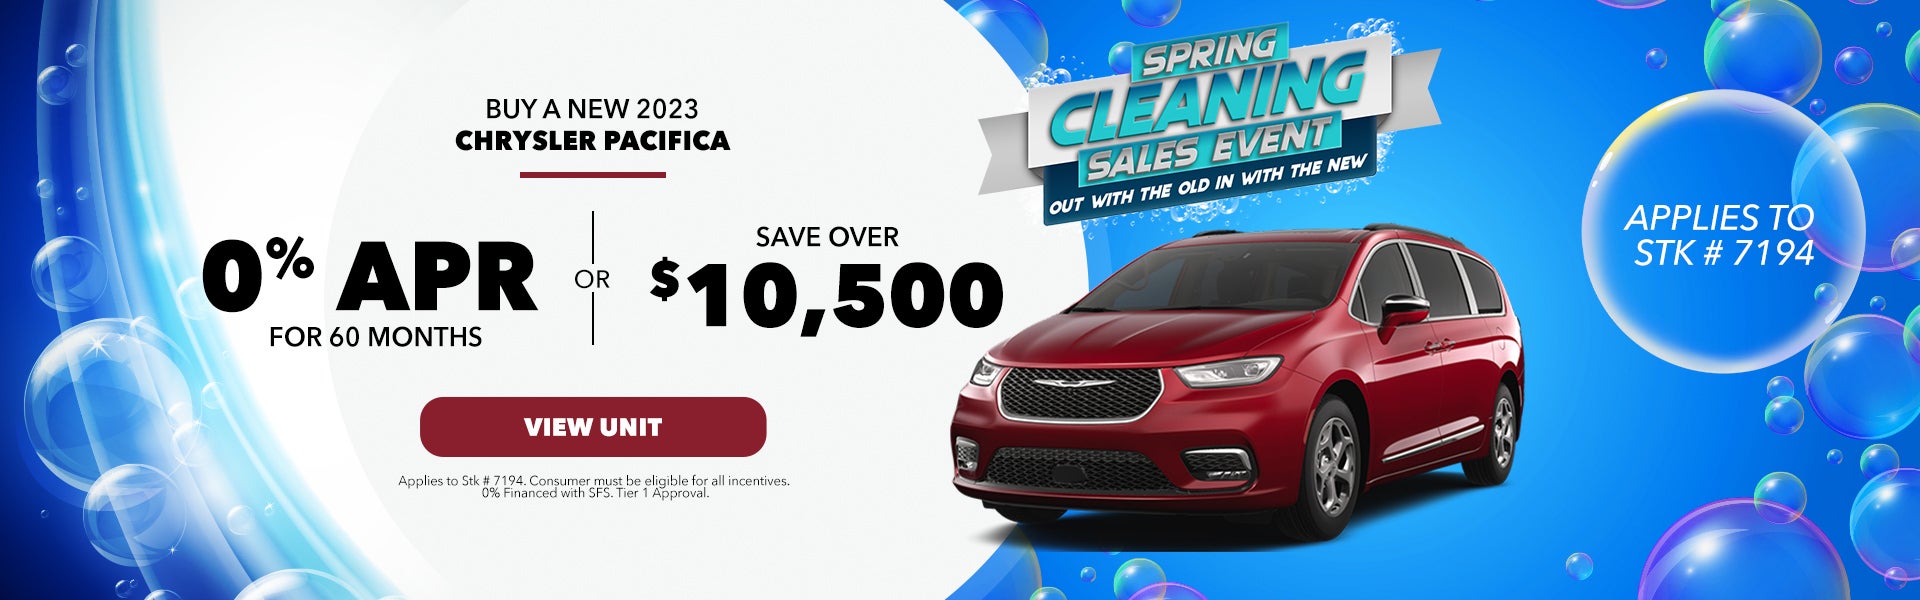 Buy a New 2023 Chrysler Pacifica 0% for 60 Months